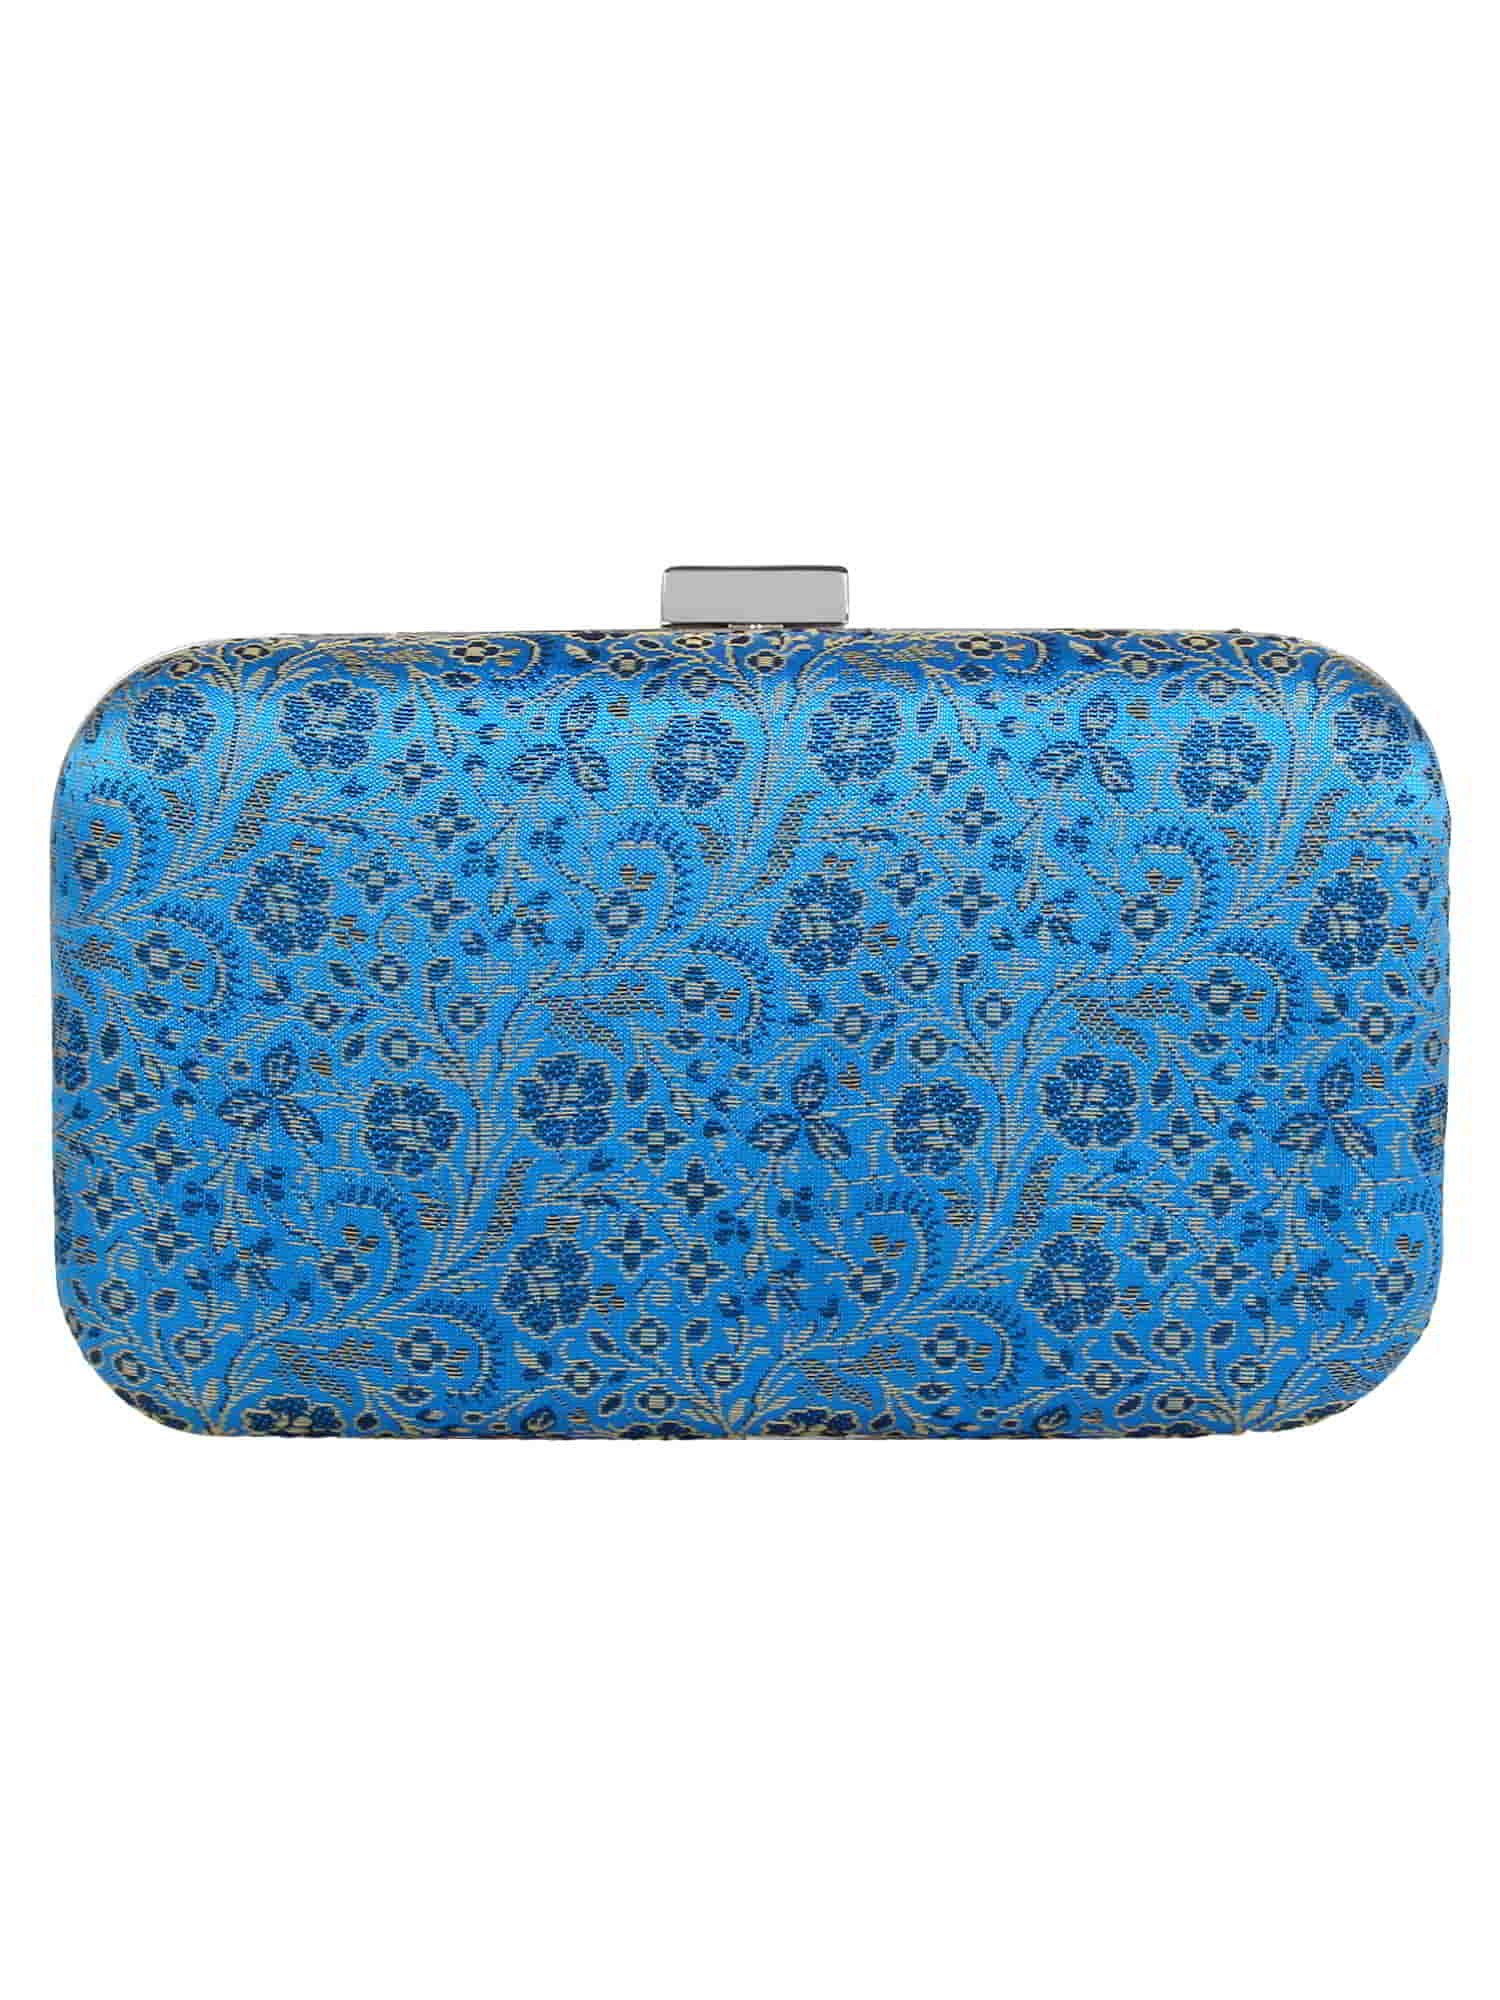 Tulle Printed Faux Silk Clutch